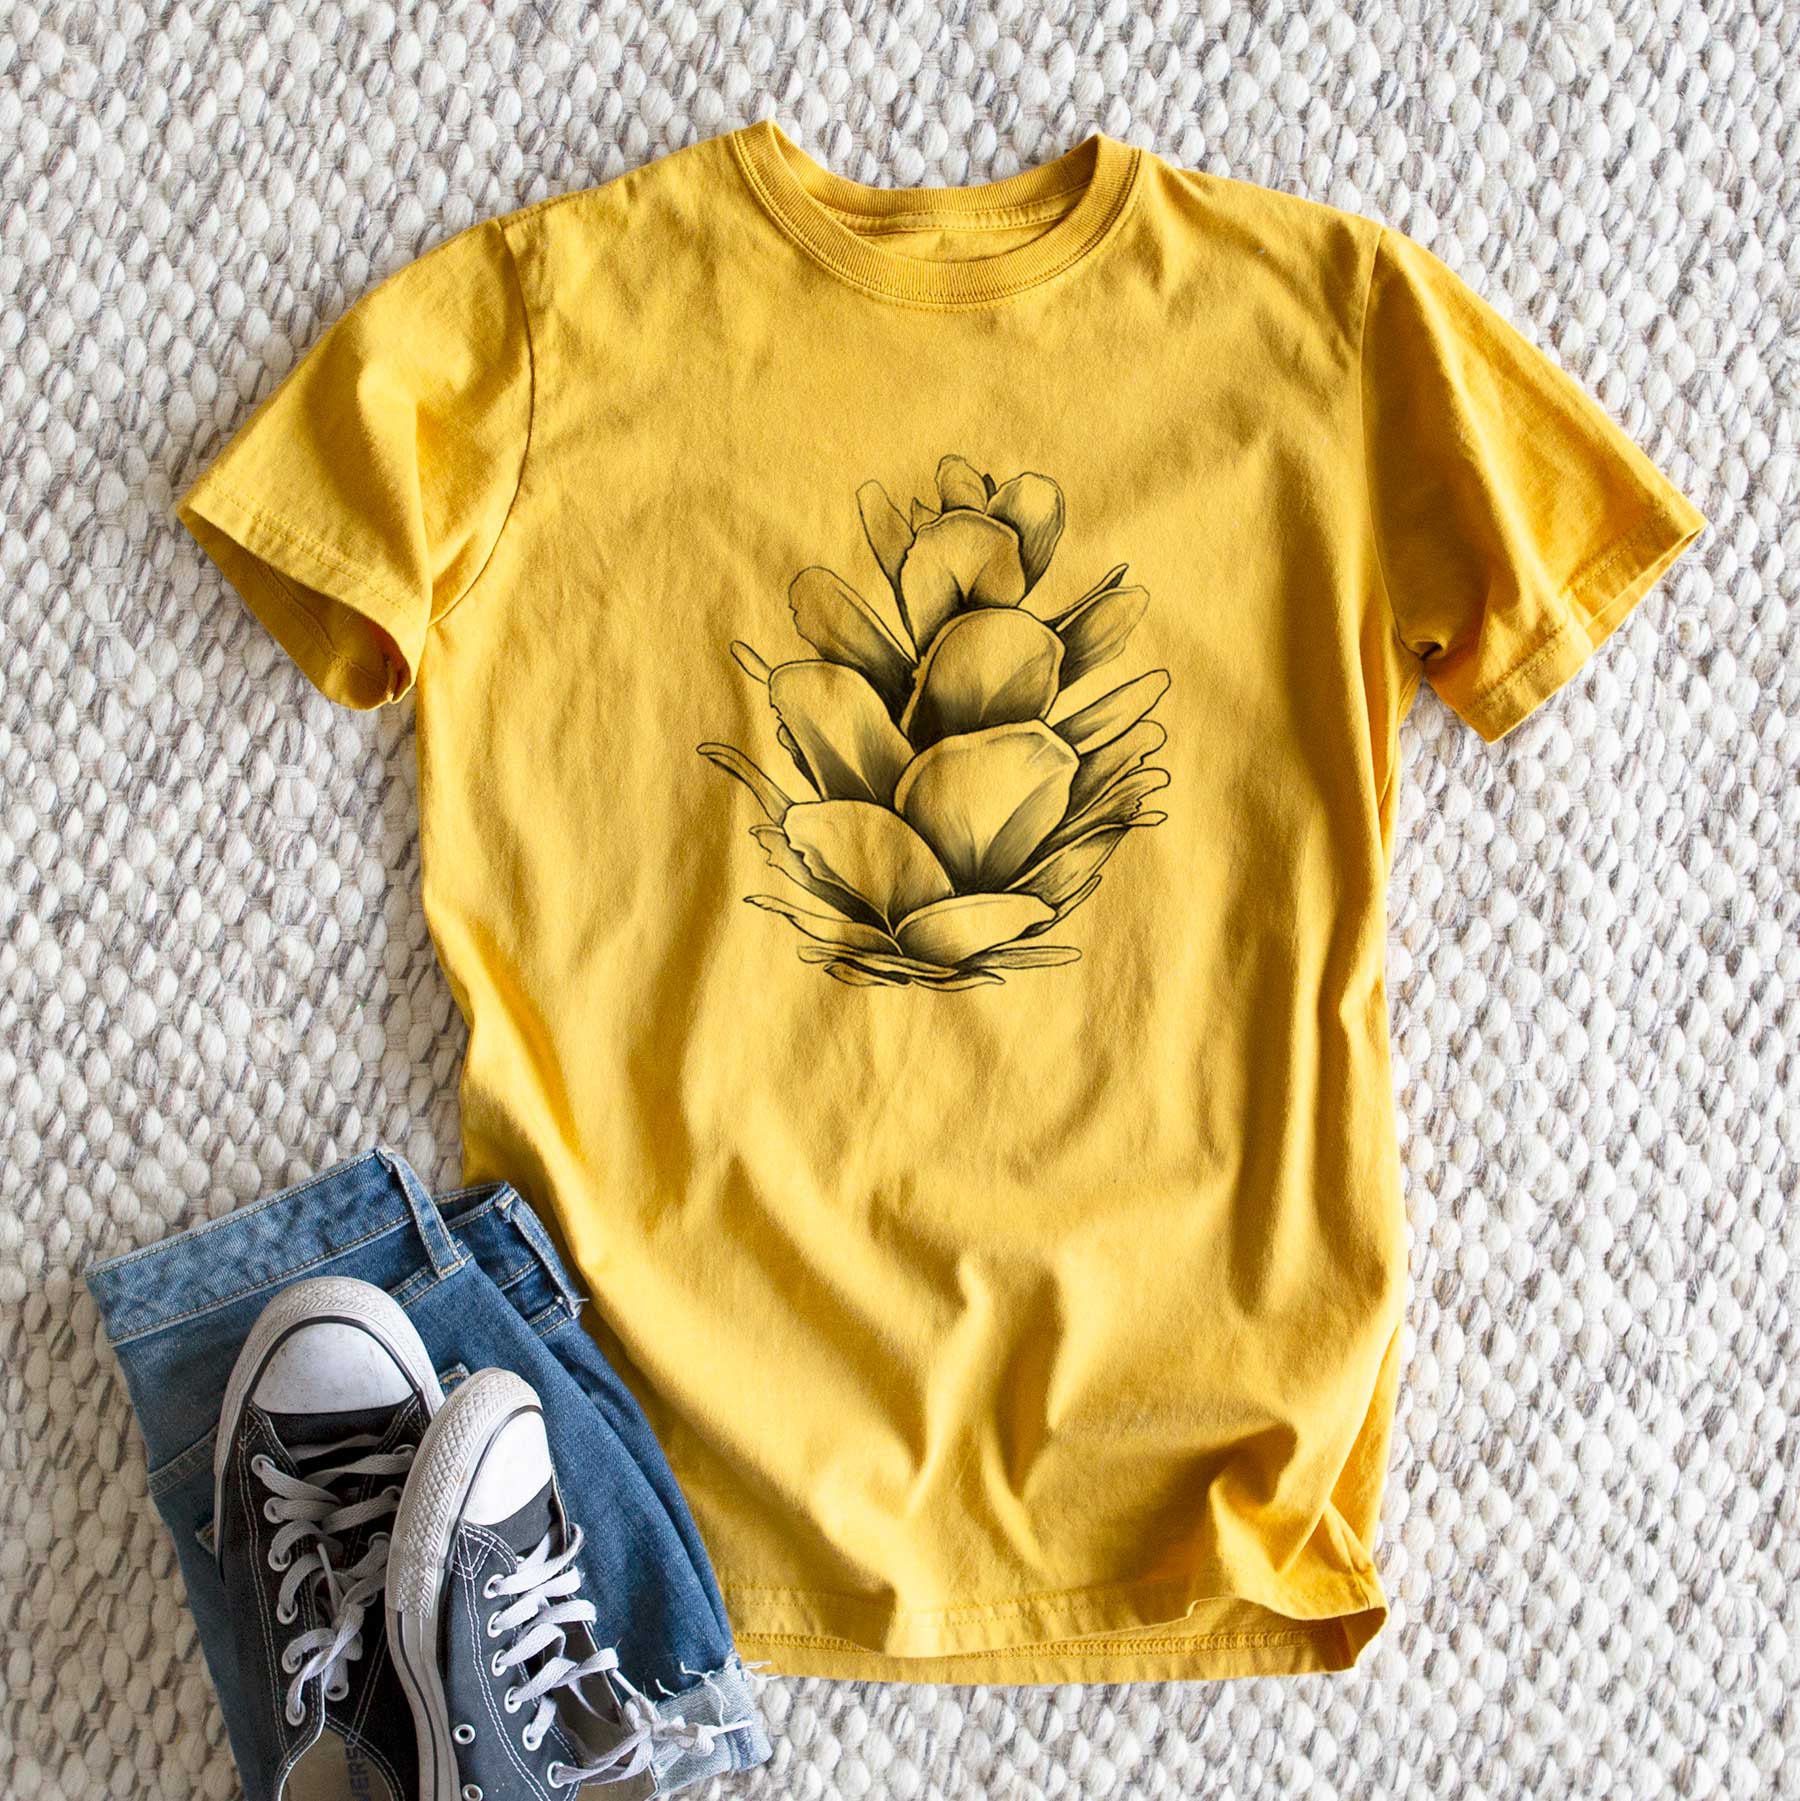 Looking Pine Today - Pineapple Shirt